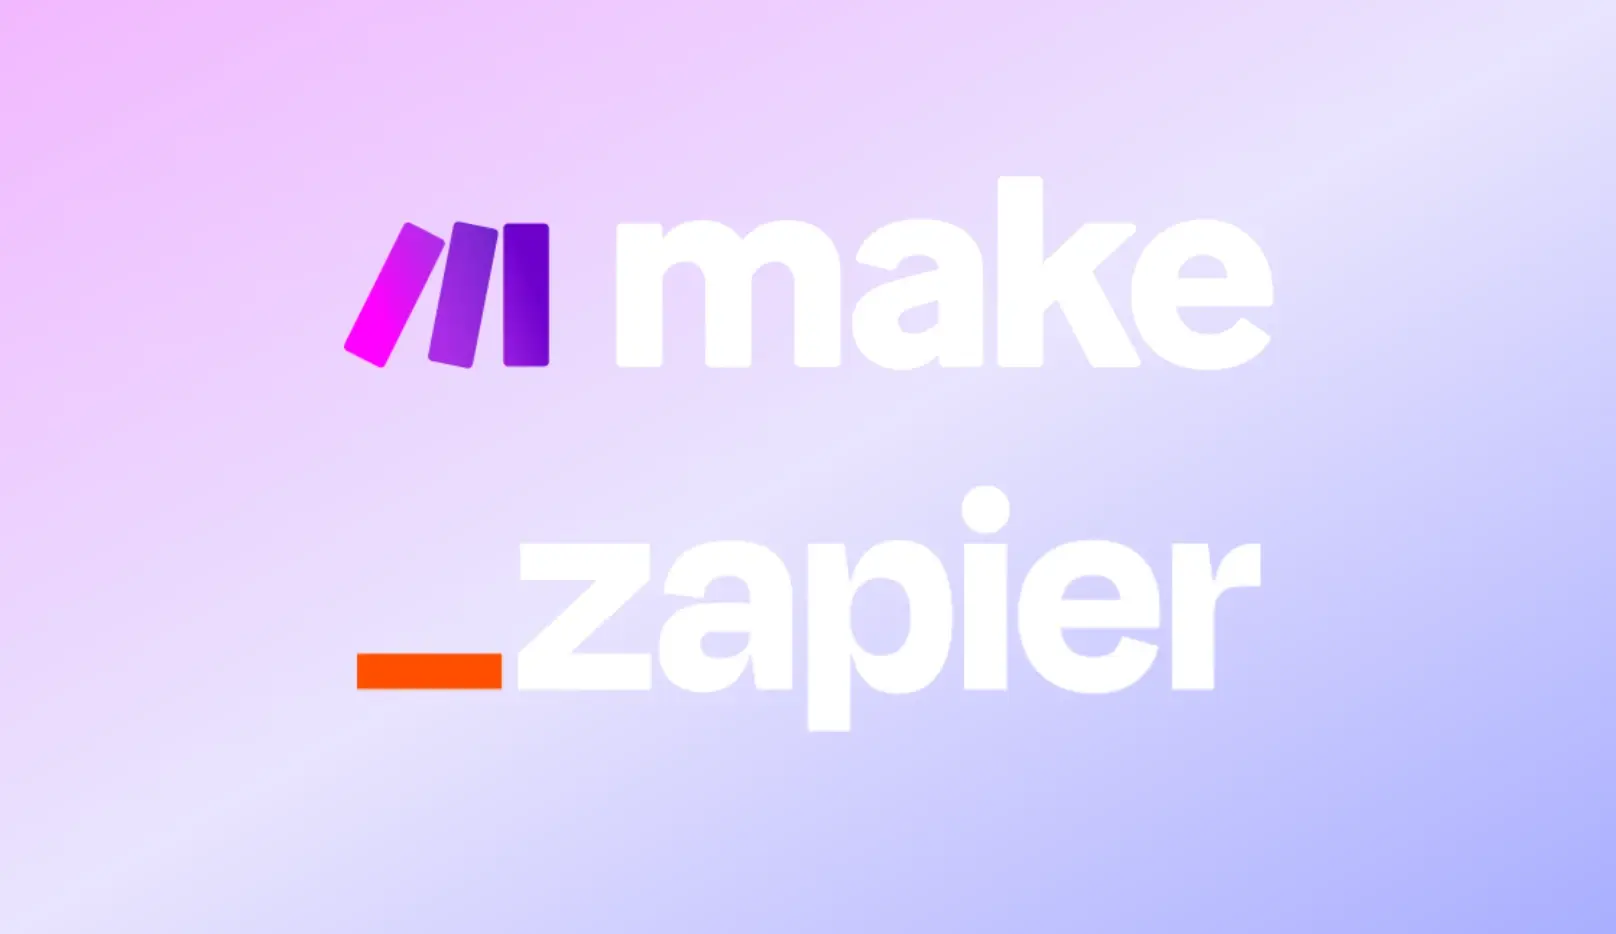 Scraptio integrations with Zapier, Make, Integromat, and more